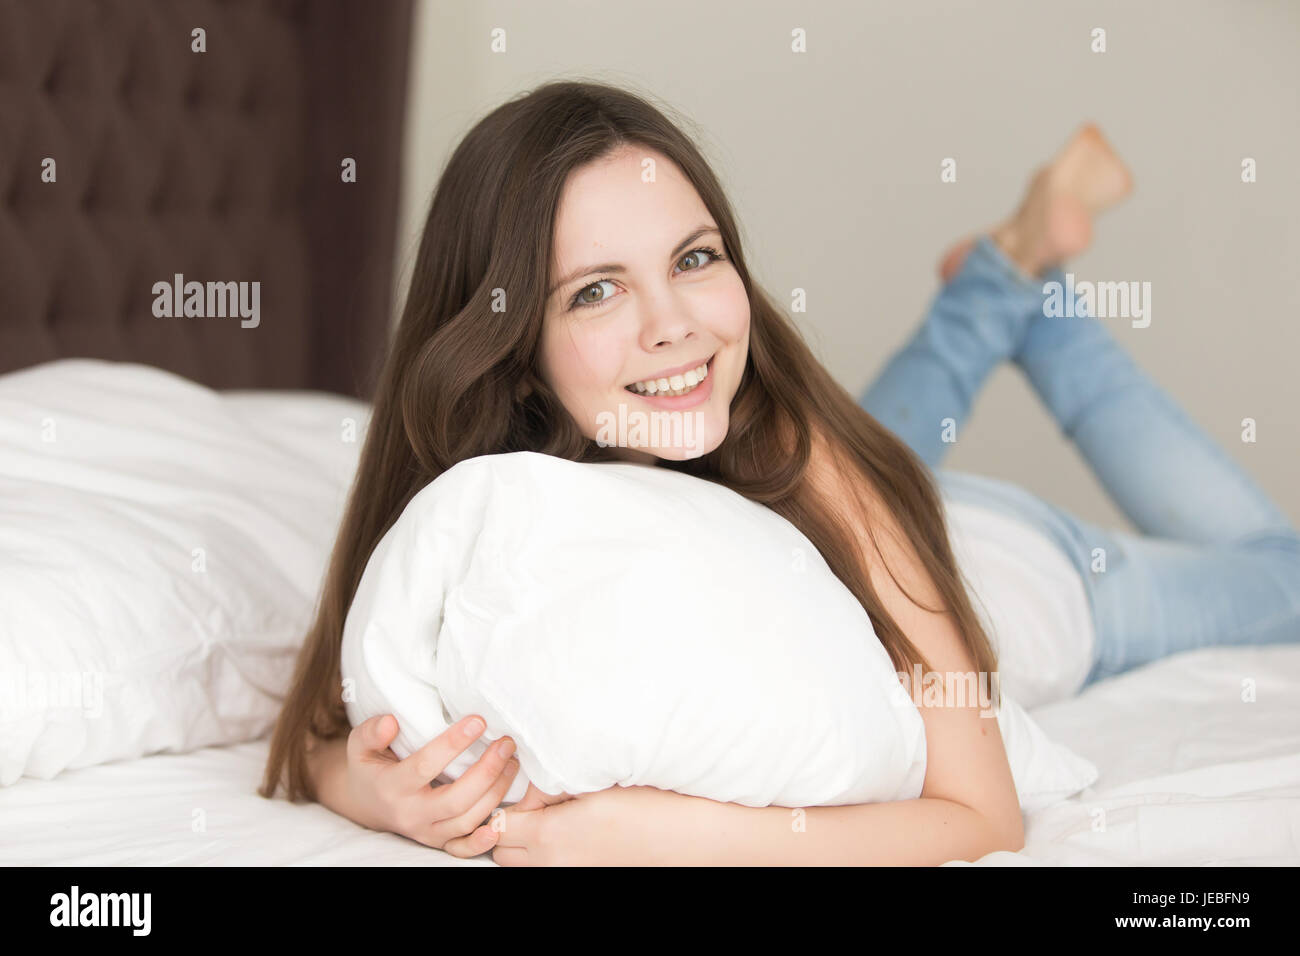 Relaxed young woman lying in bed on stomach Stock Photo